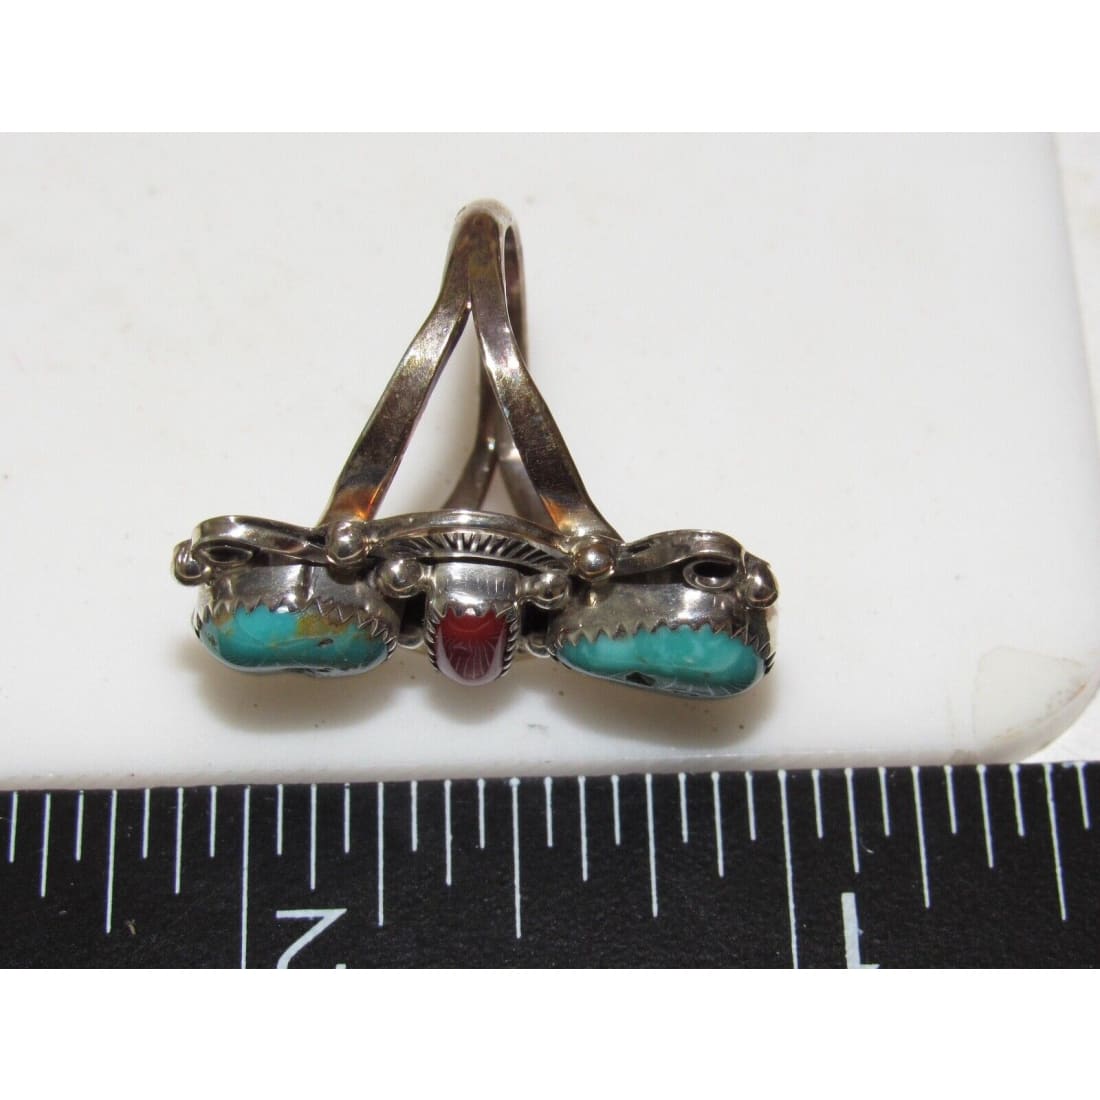 Navajo Turquoise Coral Ring Size 7 Sterling Silver Royston